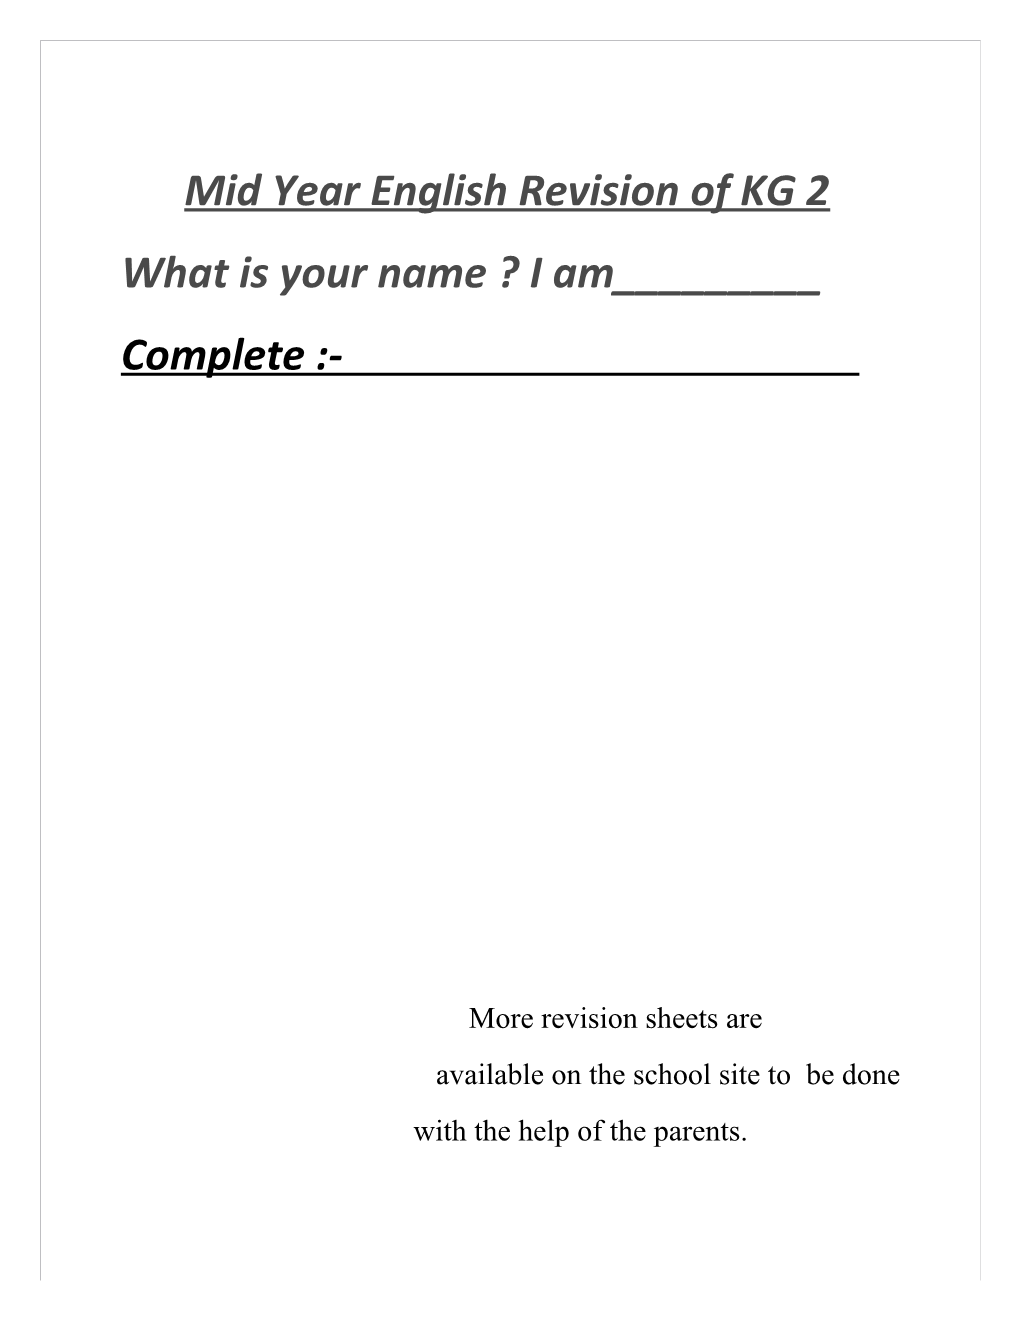 Mid Year English Revision of KG 2